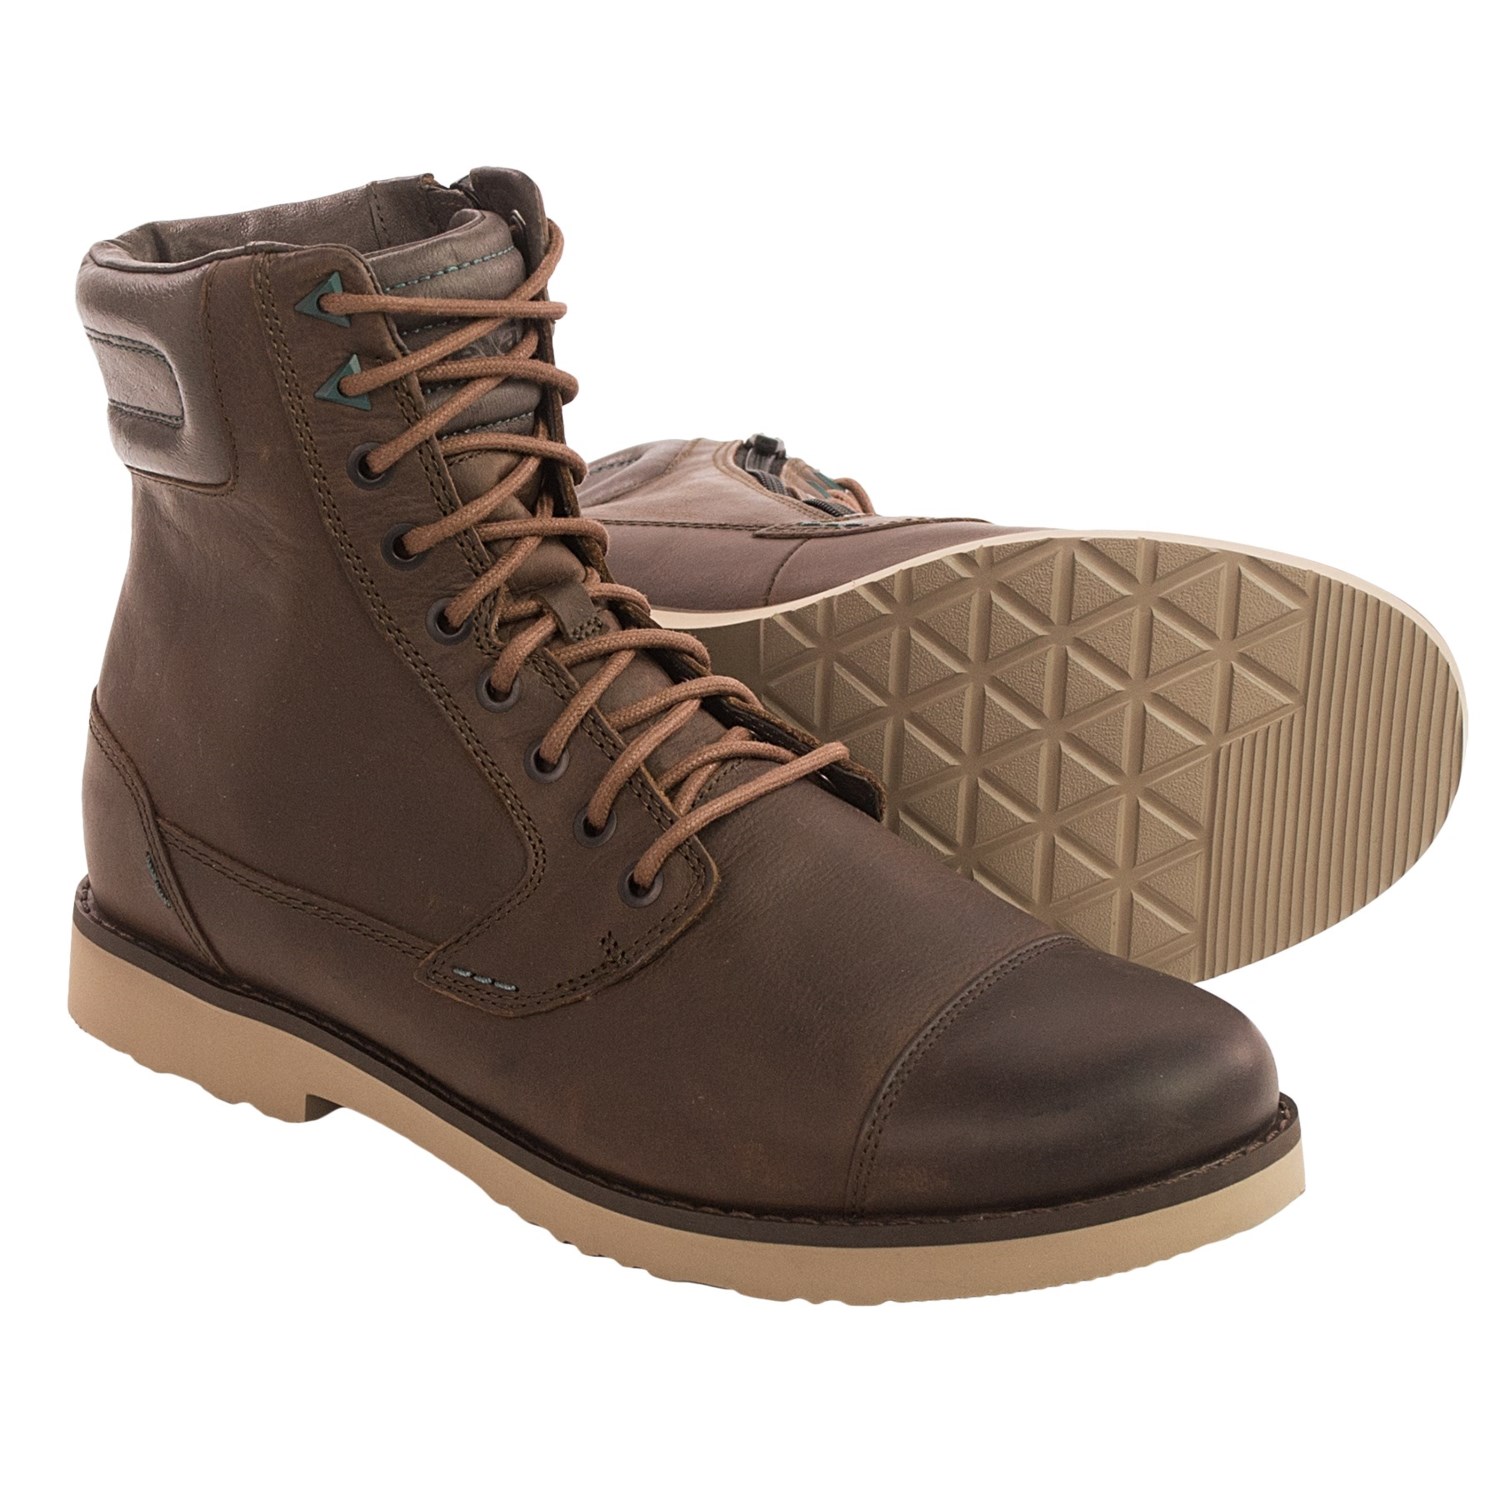 Teva Durban Tall Lace Leather Boots (For Men) 46